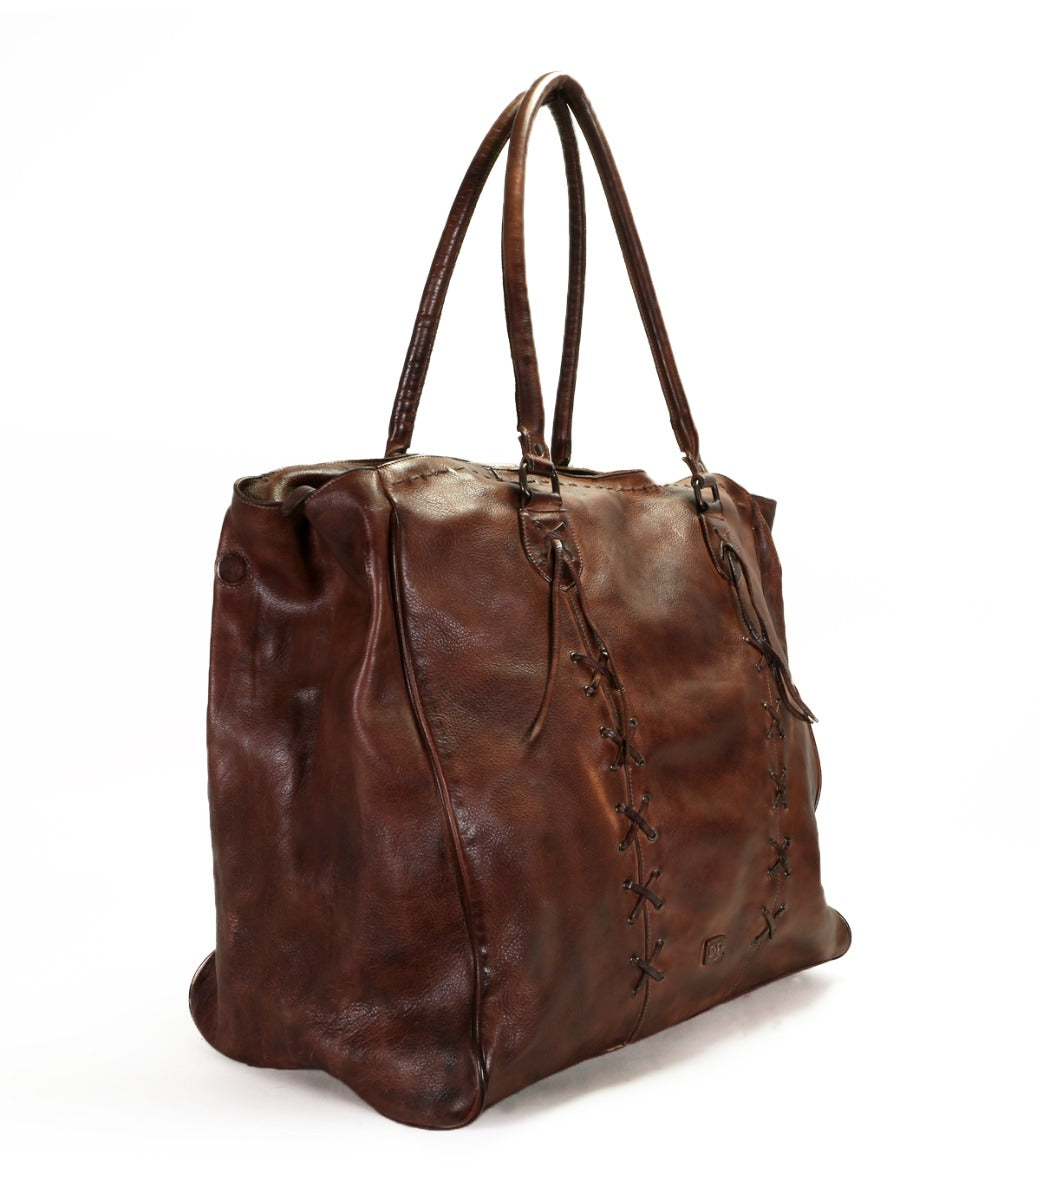 A Rebekah handbag by Bed Stu, made of leather with a strap.